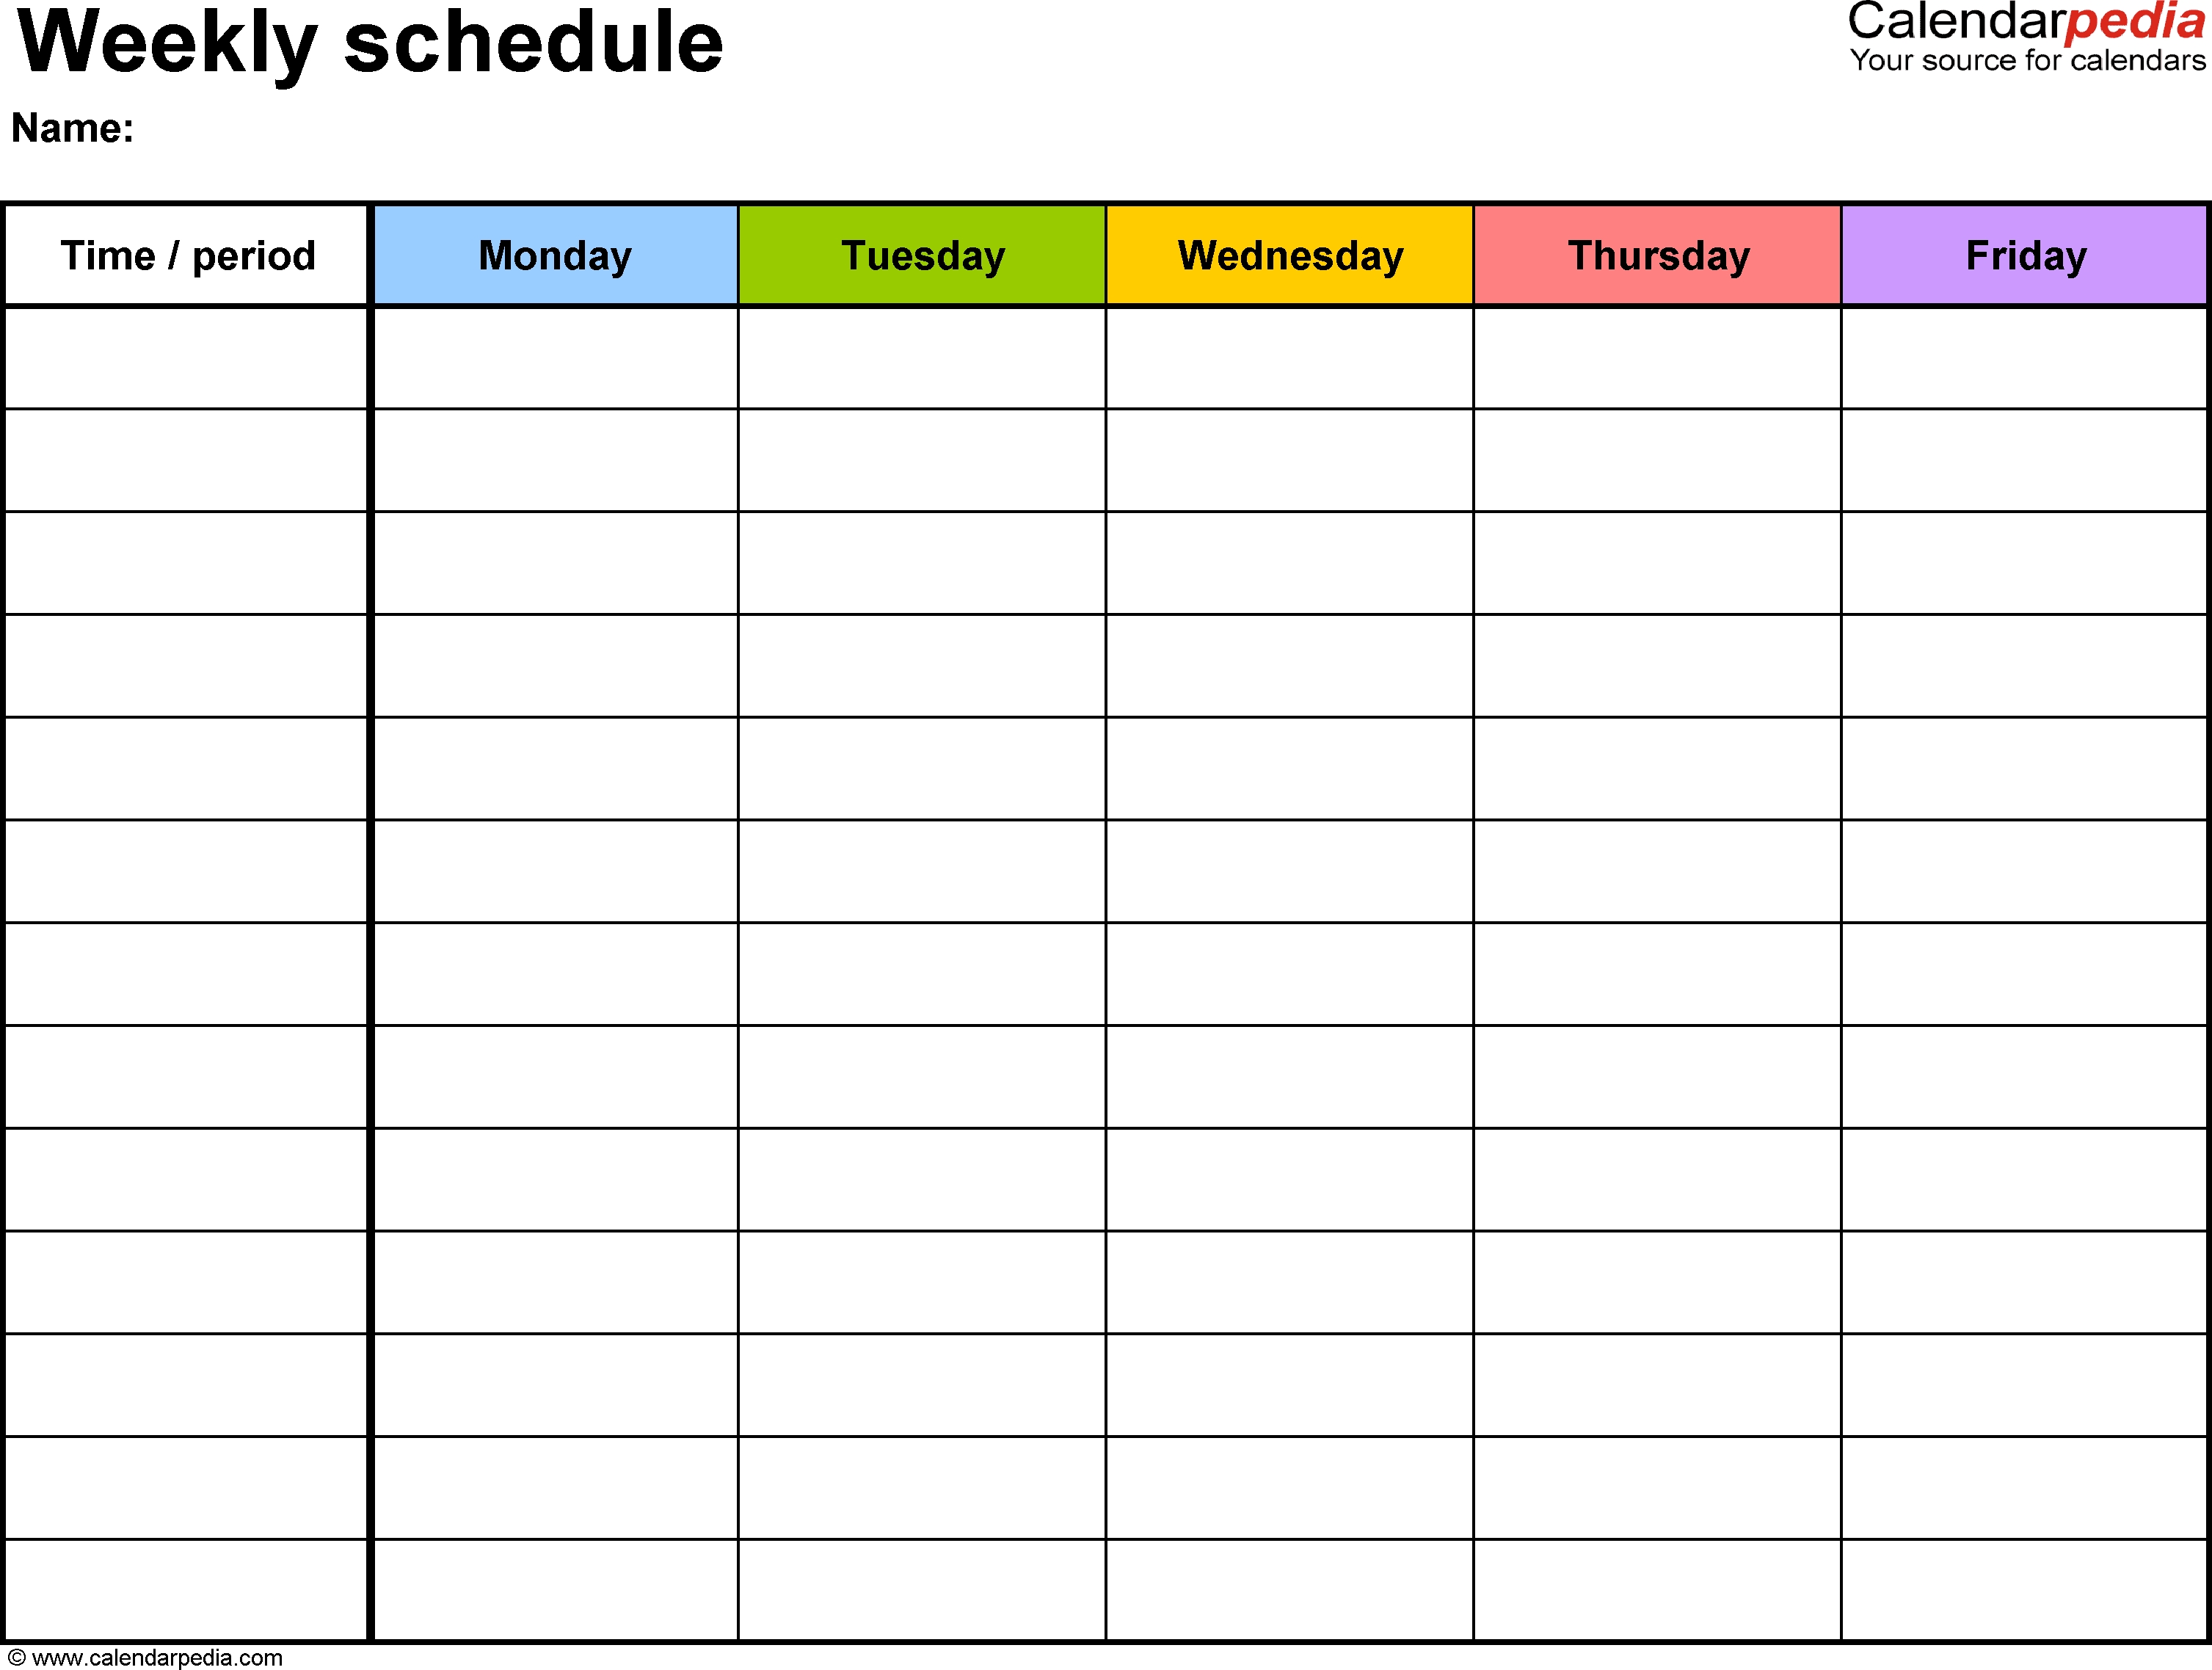 Free Weekly Schedule Templates For Excel - 18 Templates  Planning Monthly Calendar Excel Spreadsheet